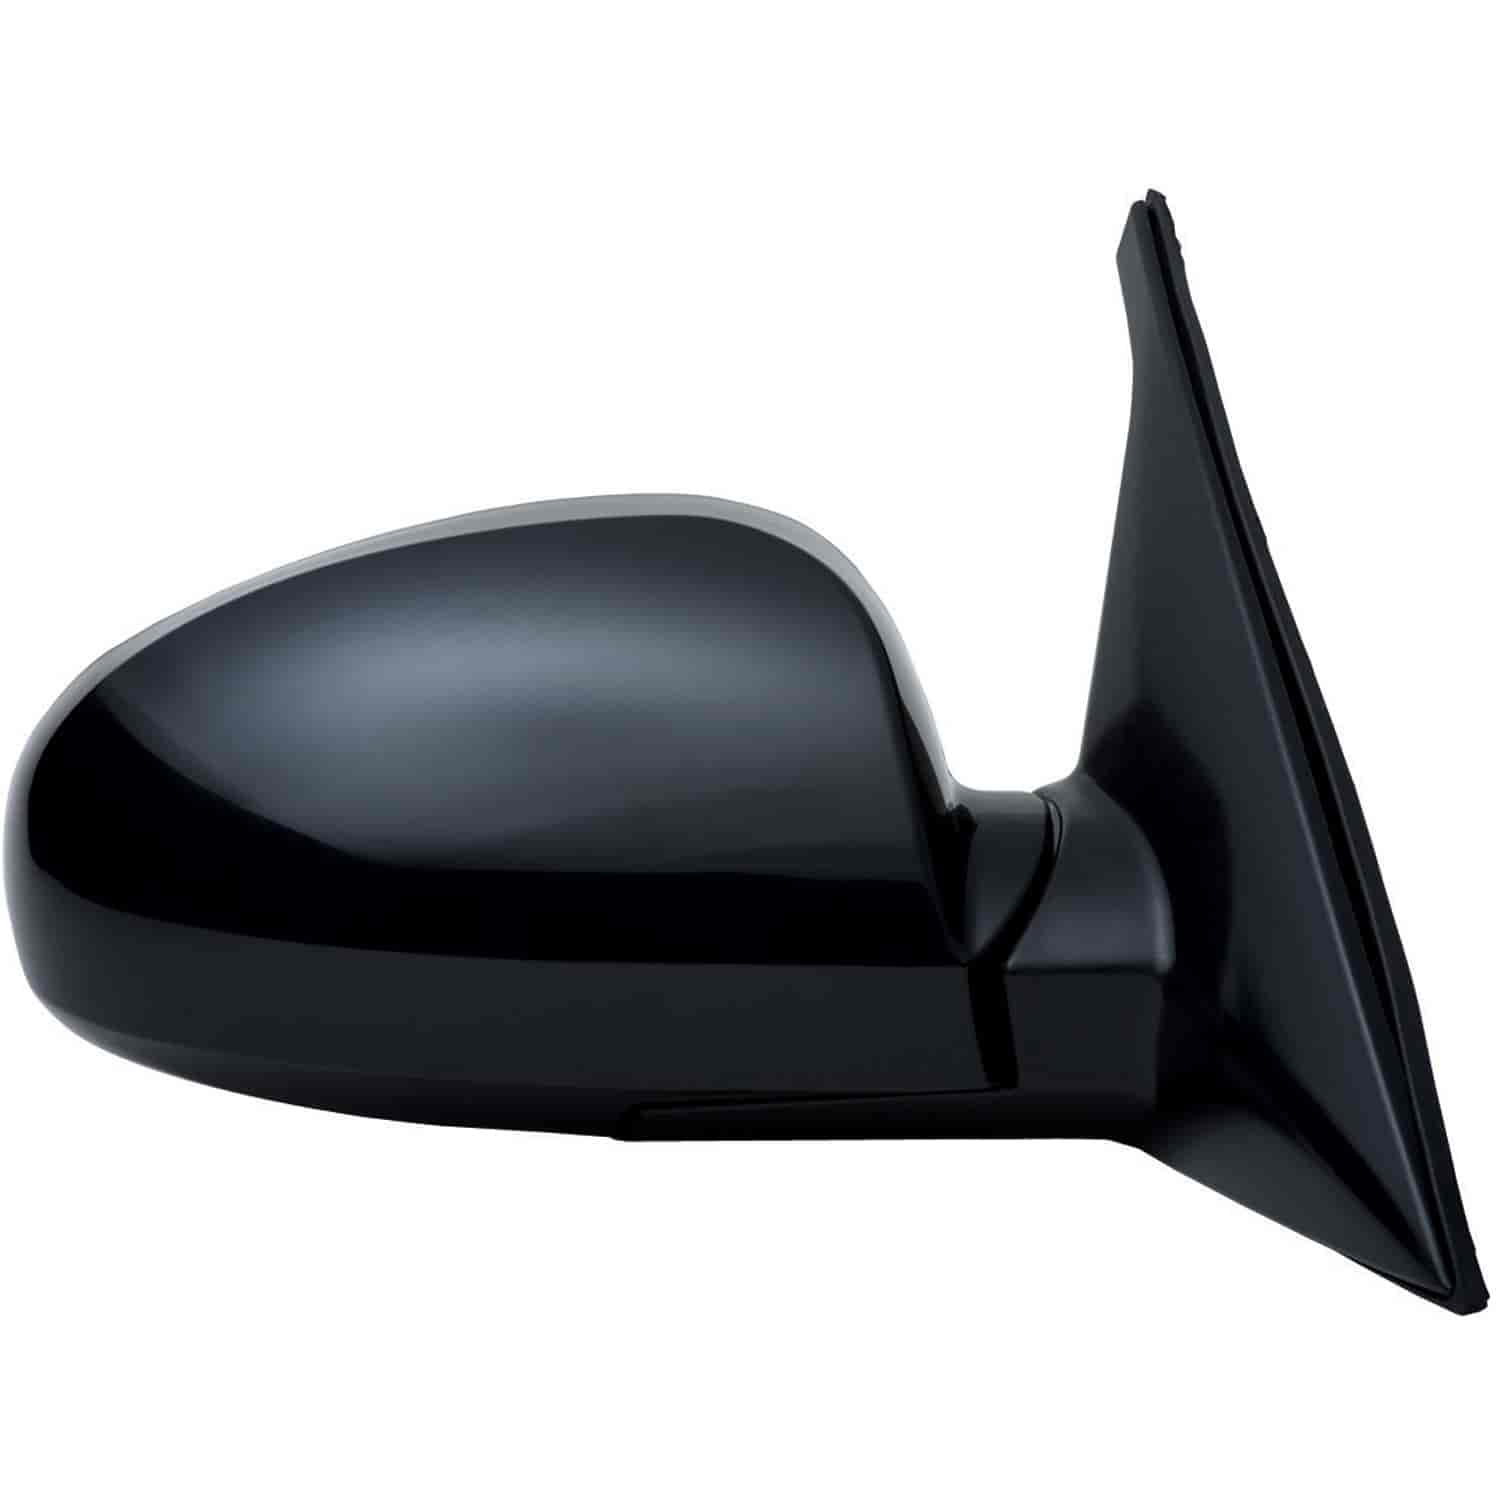 OEM Style Replacement mirror for 01-06 Kia Optima LX model passenger side mirror tested to fit and f